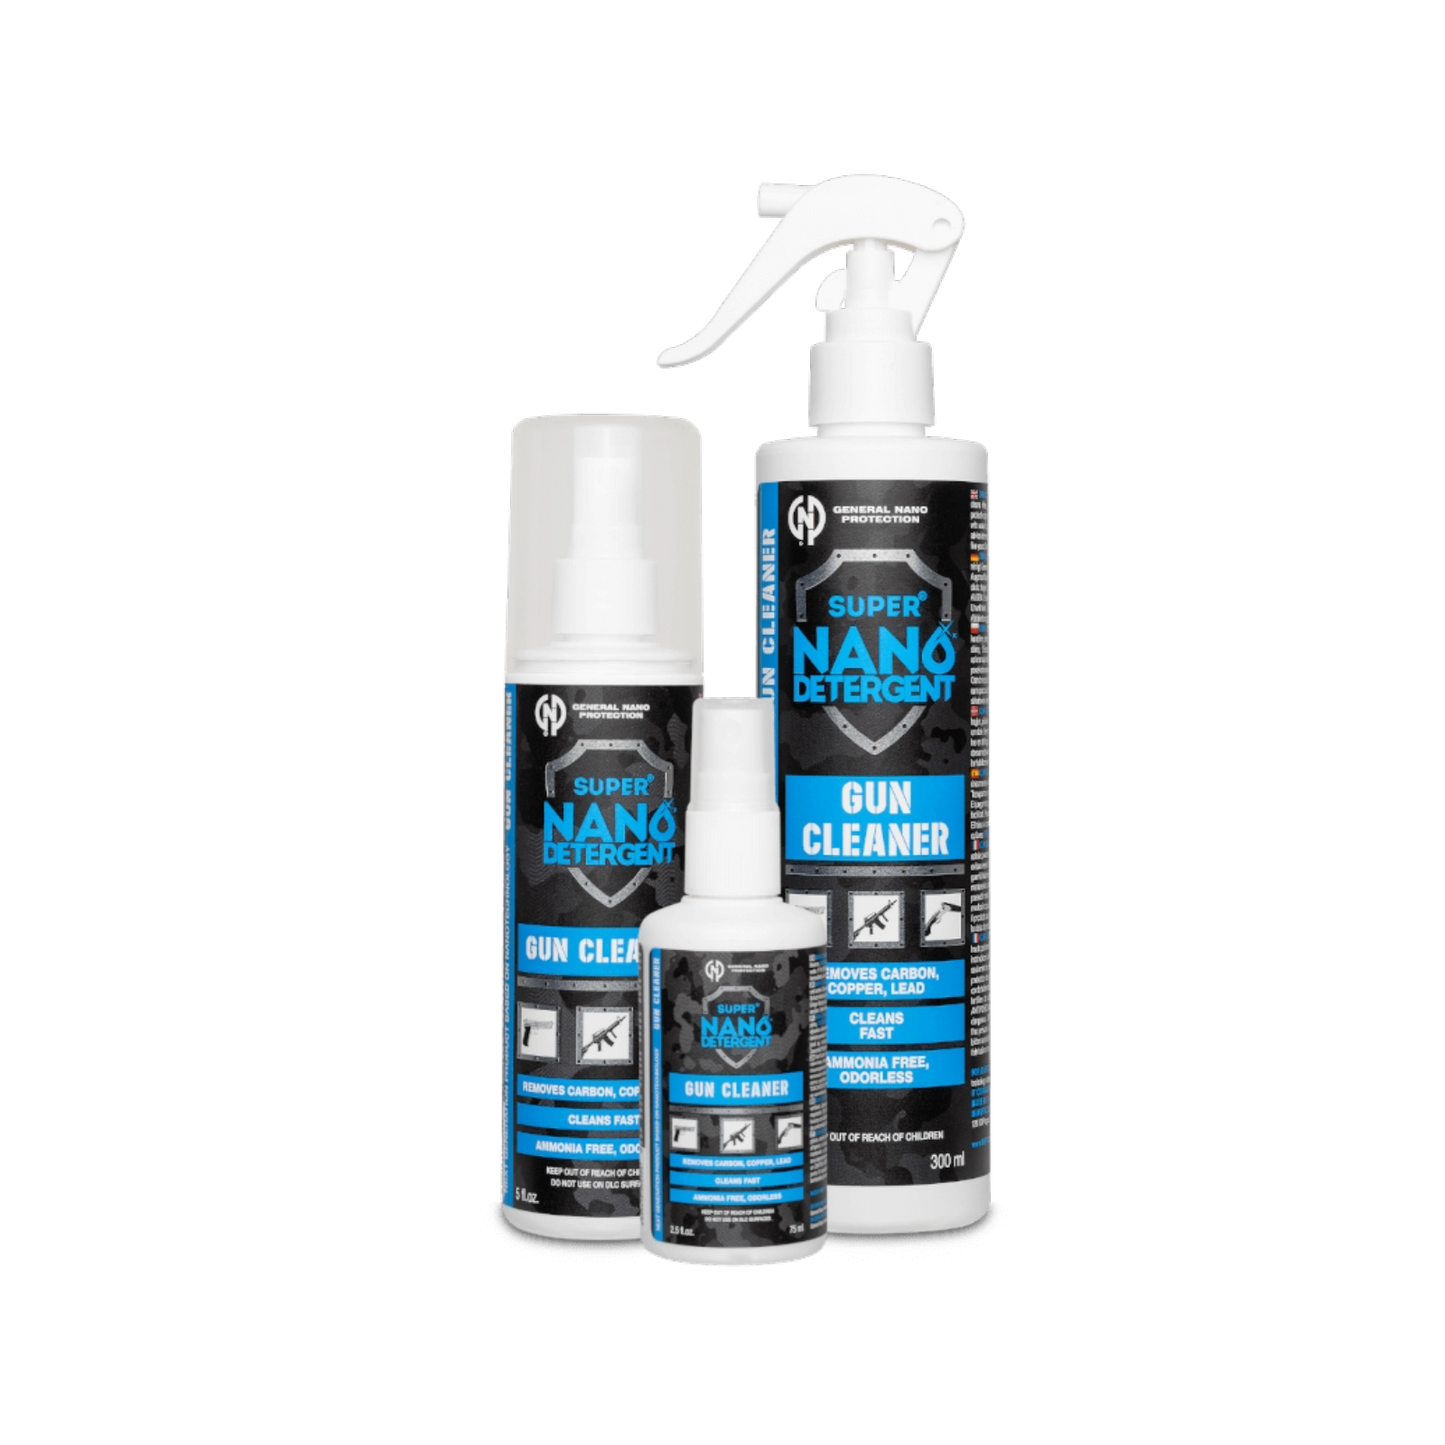 Three bottles of gun cleaner in small, medium, and large sizes lined up side-by-side